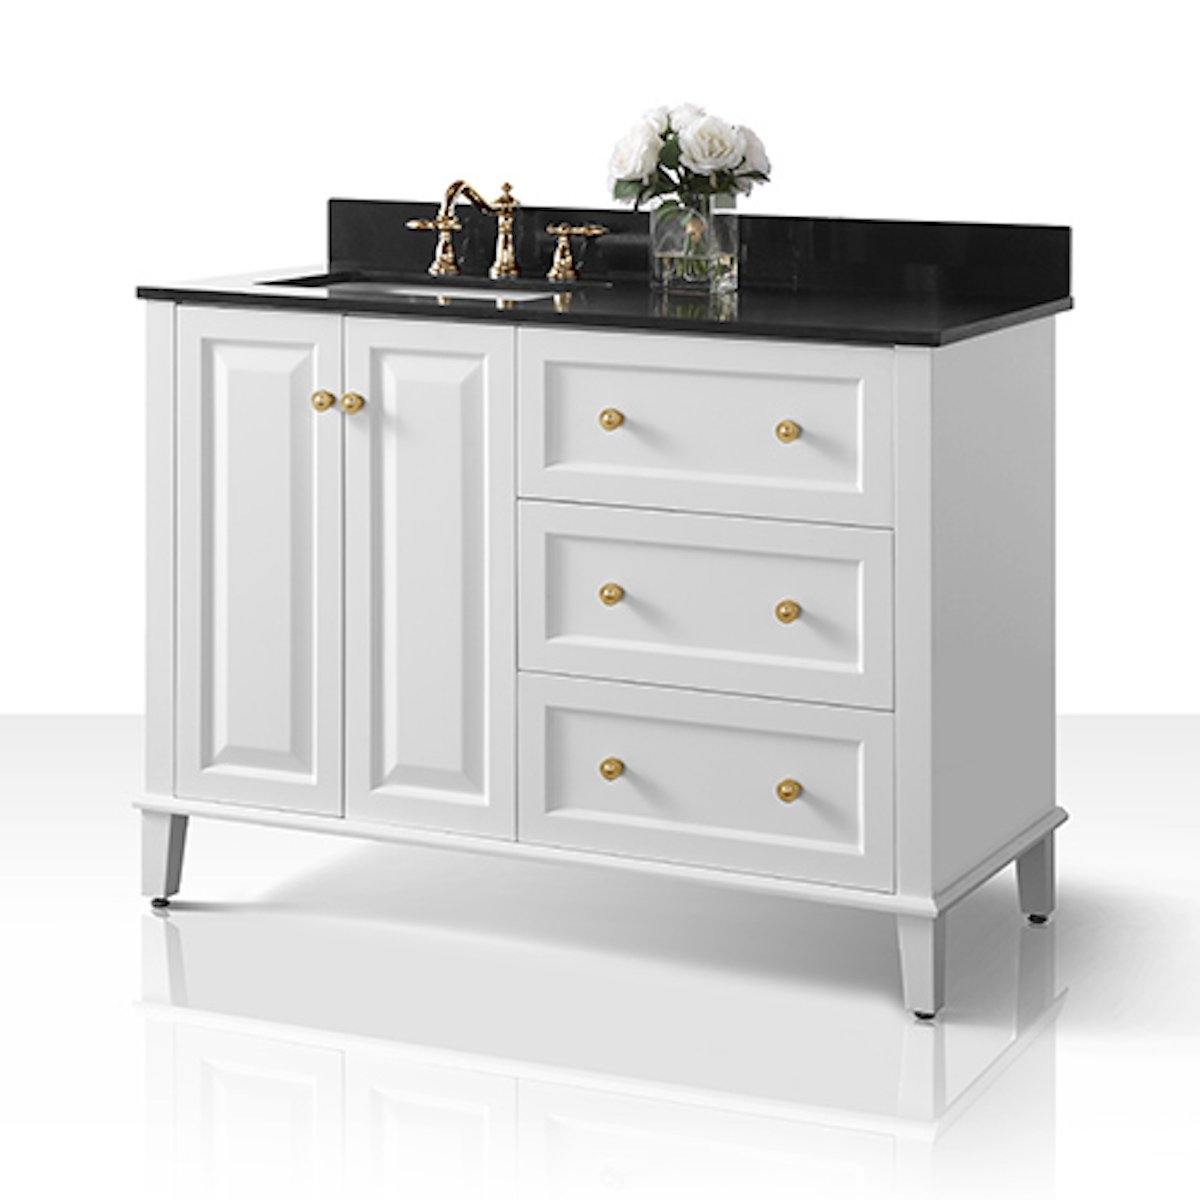 Ancerre Designs Hannah 48 Inch White Single Vanity with Left Basin and Gold Hardware Side